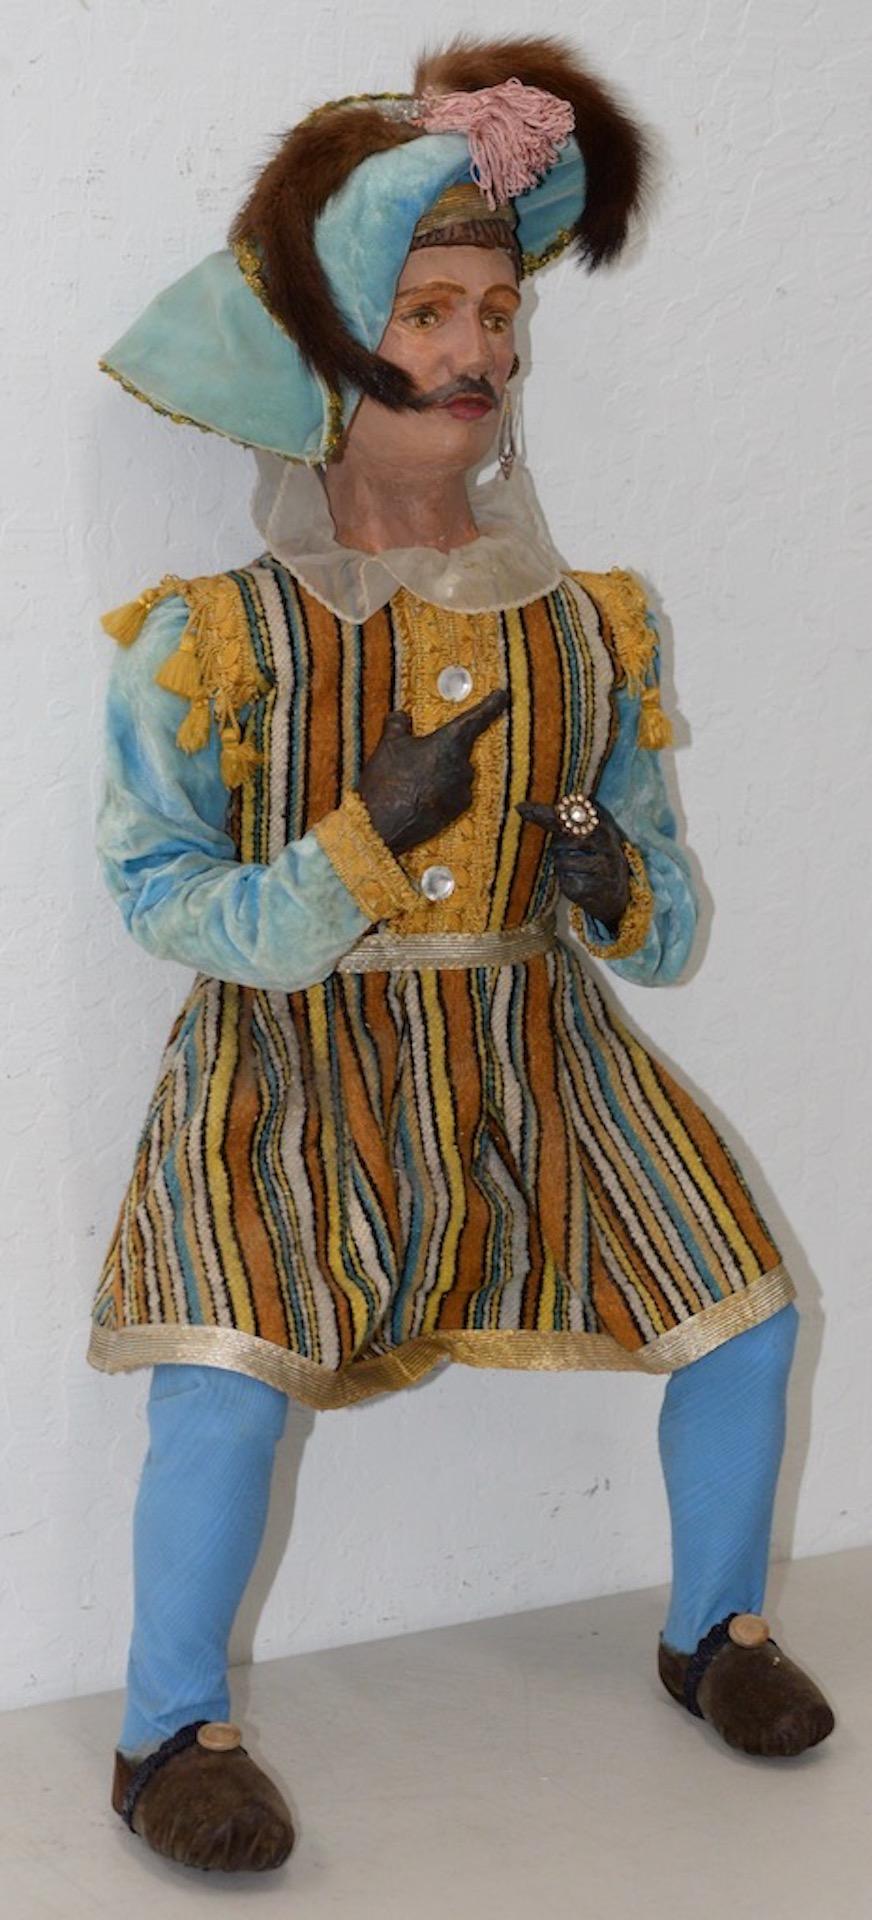 Vintage Christmas Holiday Musketeer Doll, circa 1940s-1950s

Hand painted. Handmade clothing. Very nice vintage doll. Unsure if it's wood or papier mâché.

Dimensions: 13